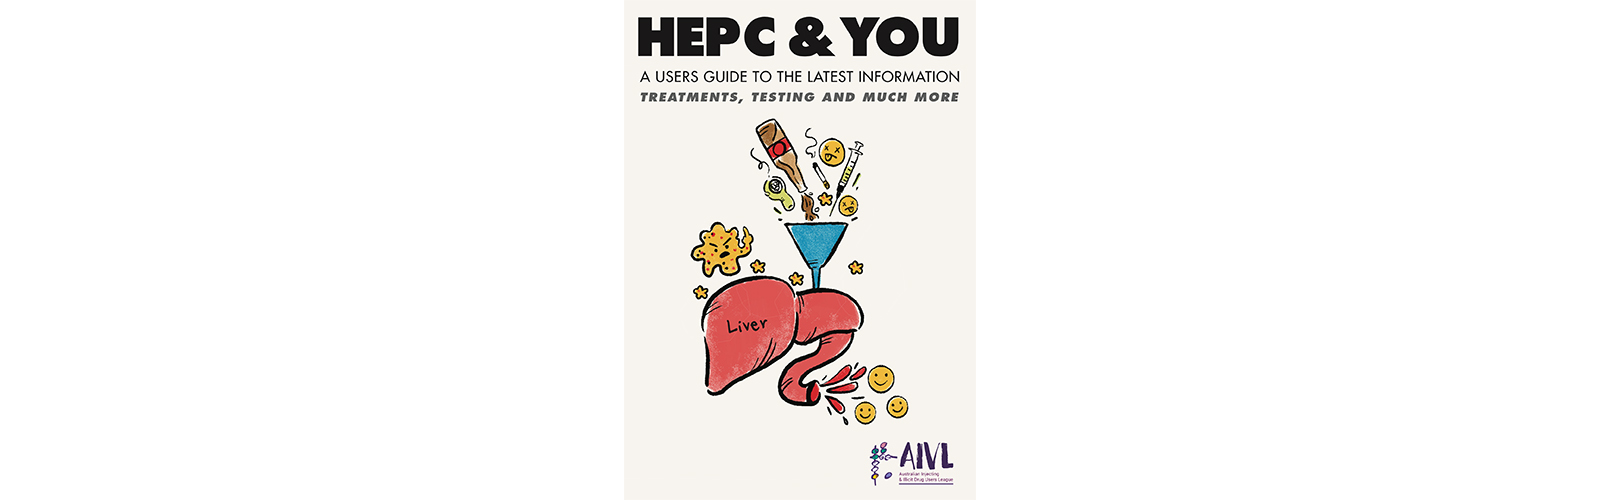 Featured image for “HEP C & YOU”